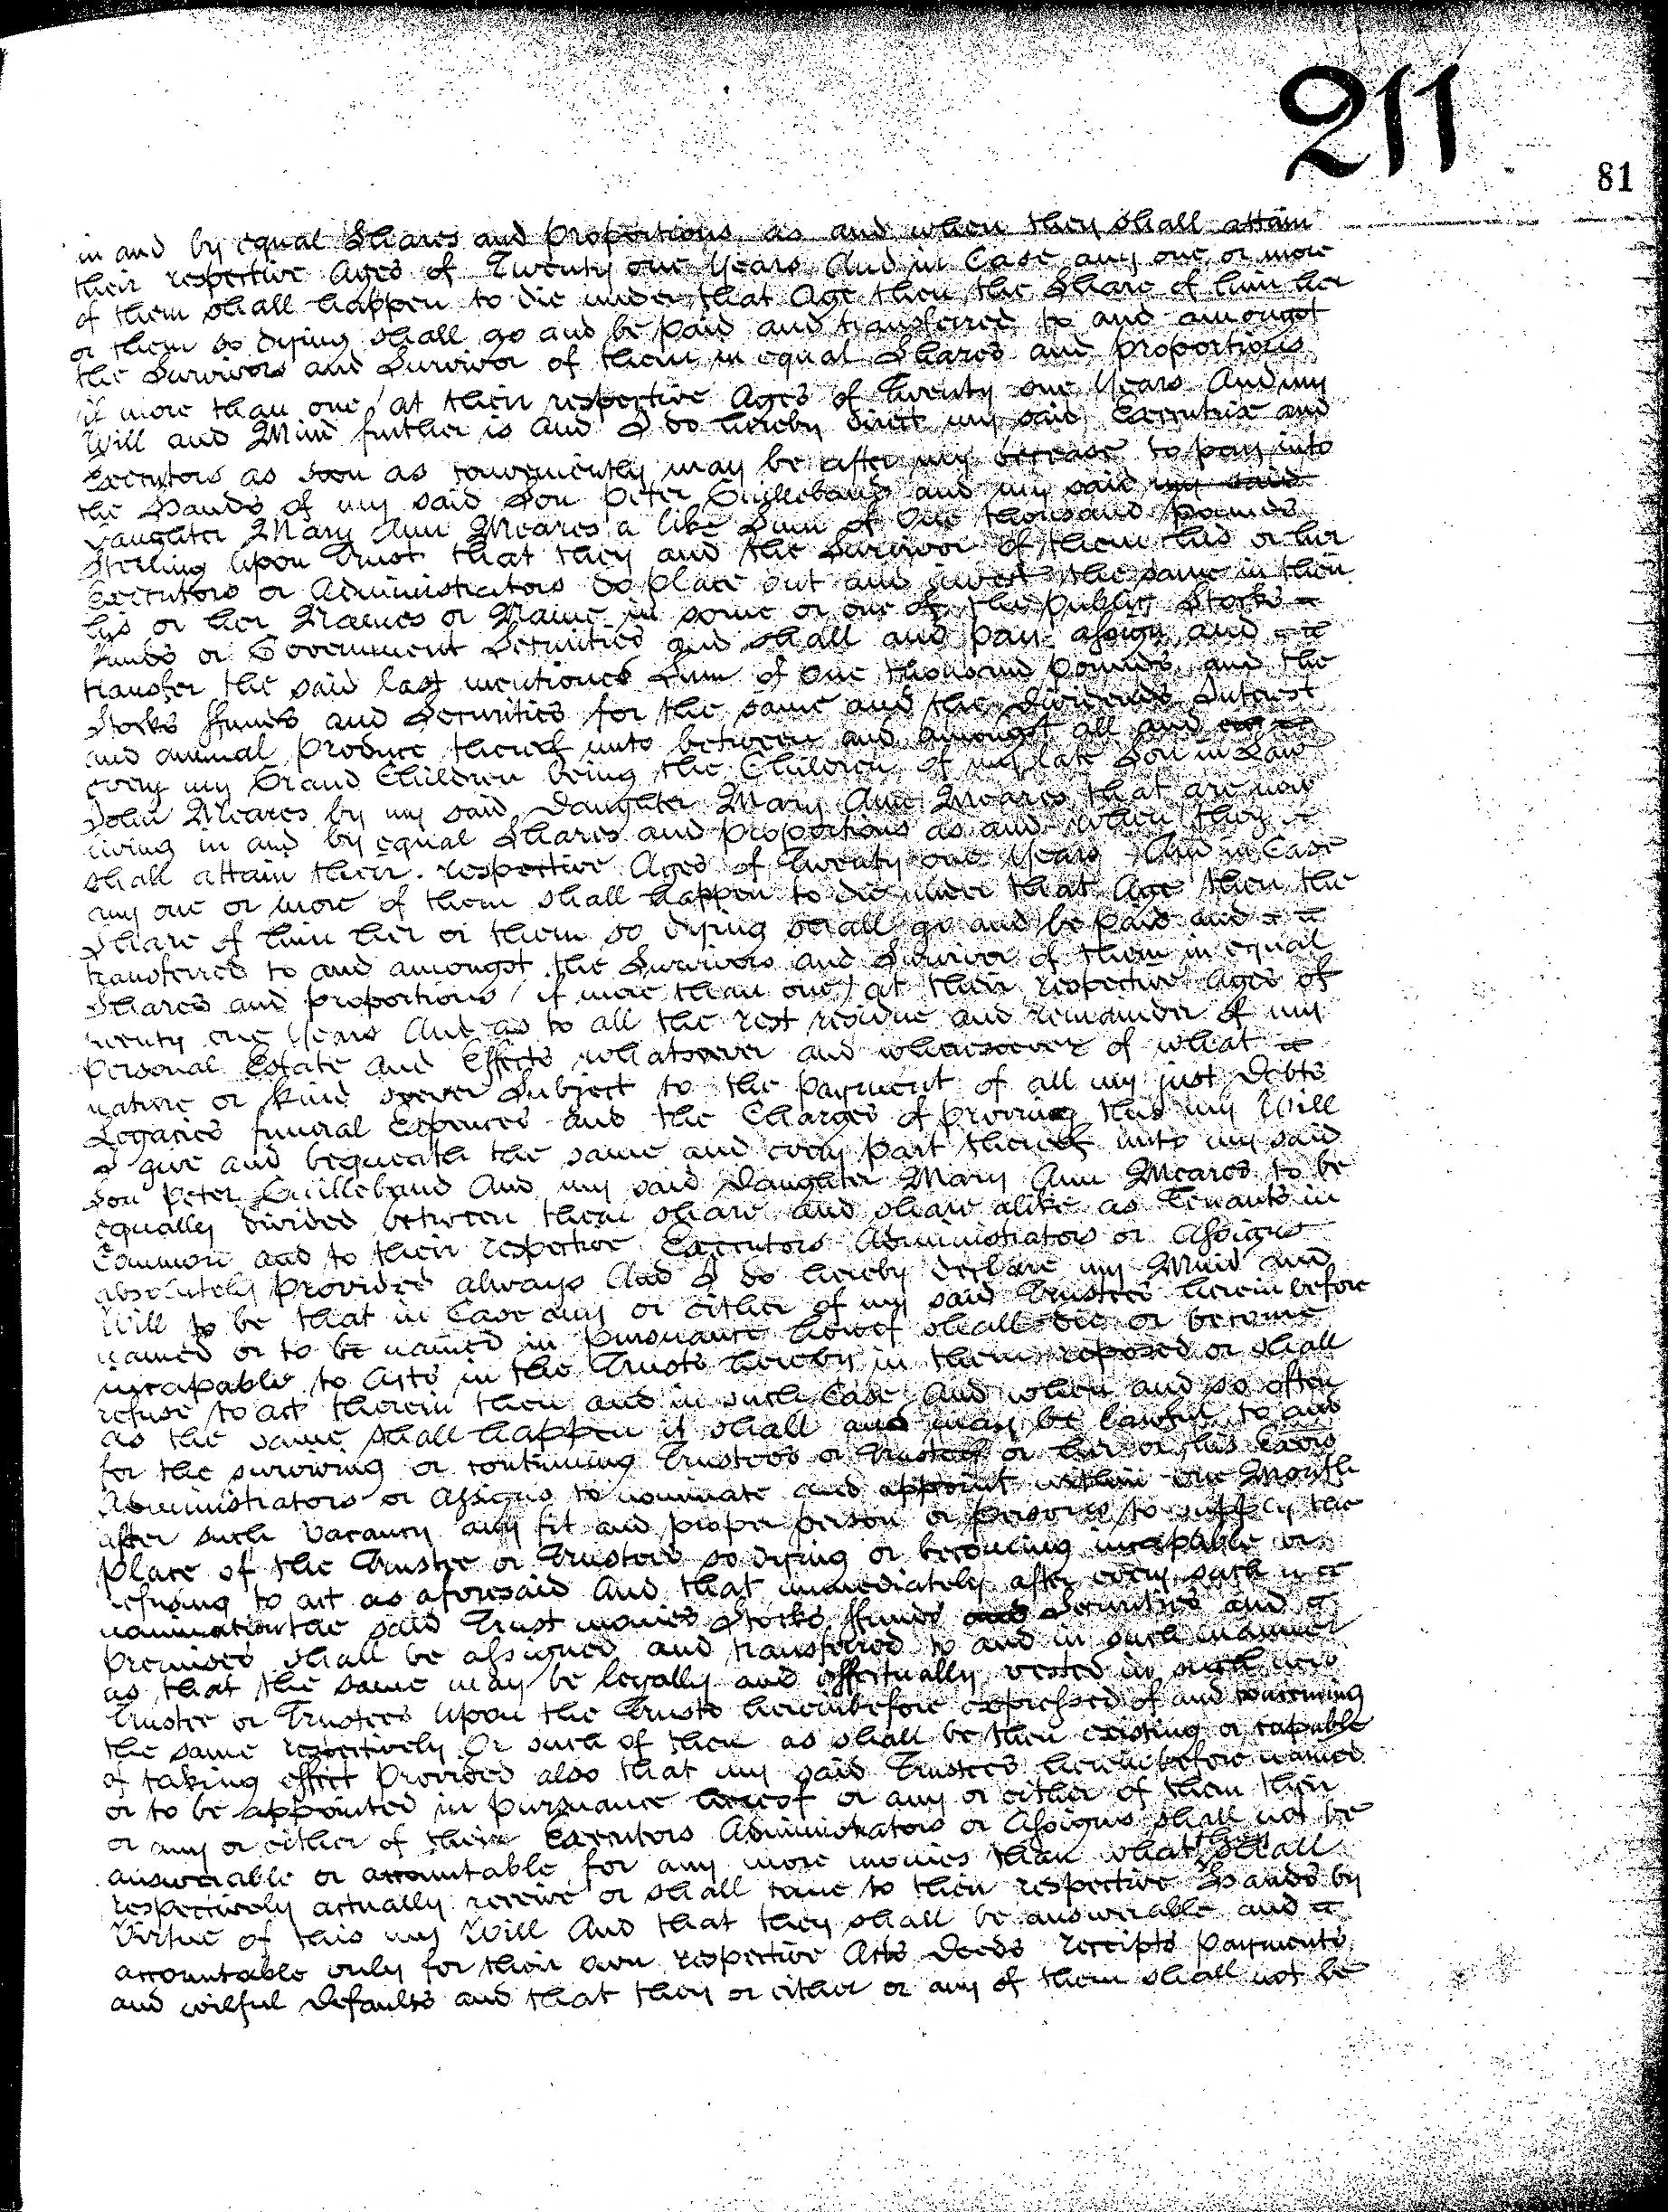 Peter Guillebaud’s will of 1821, page 4